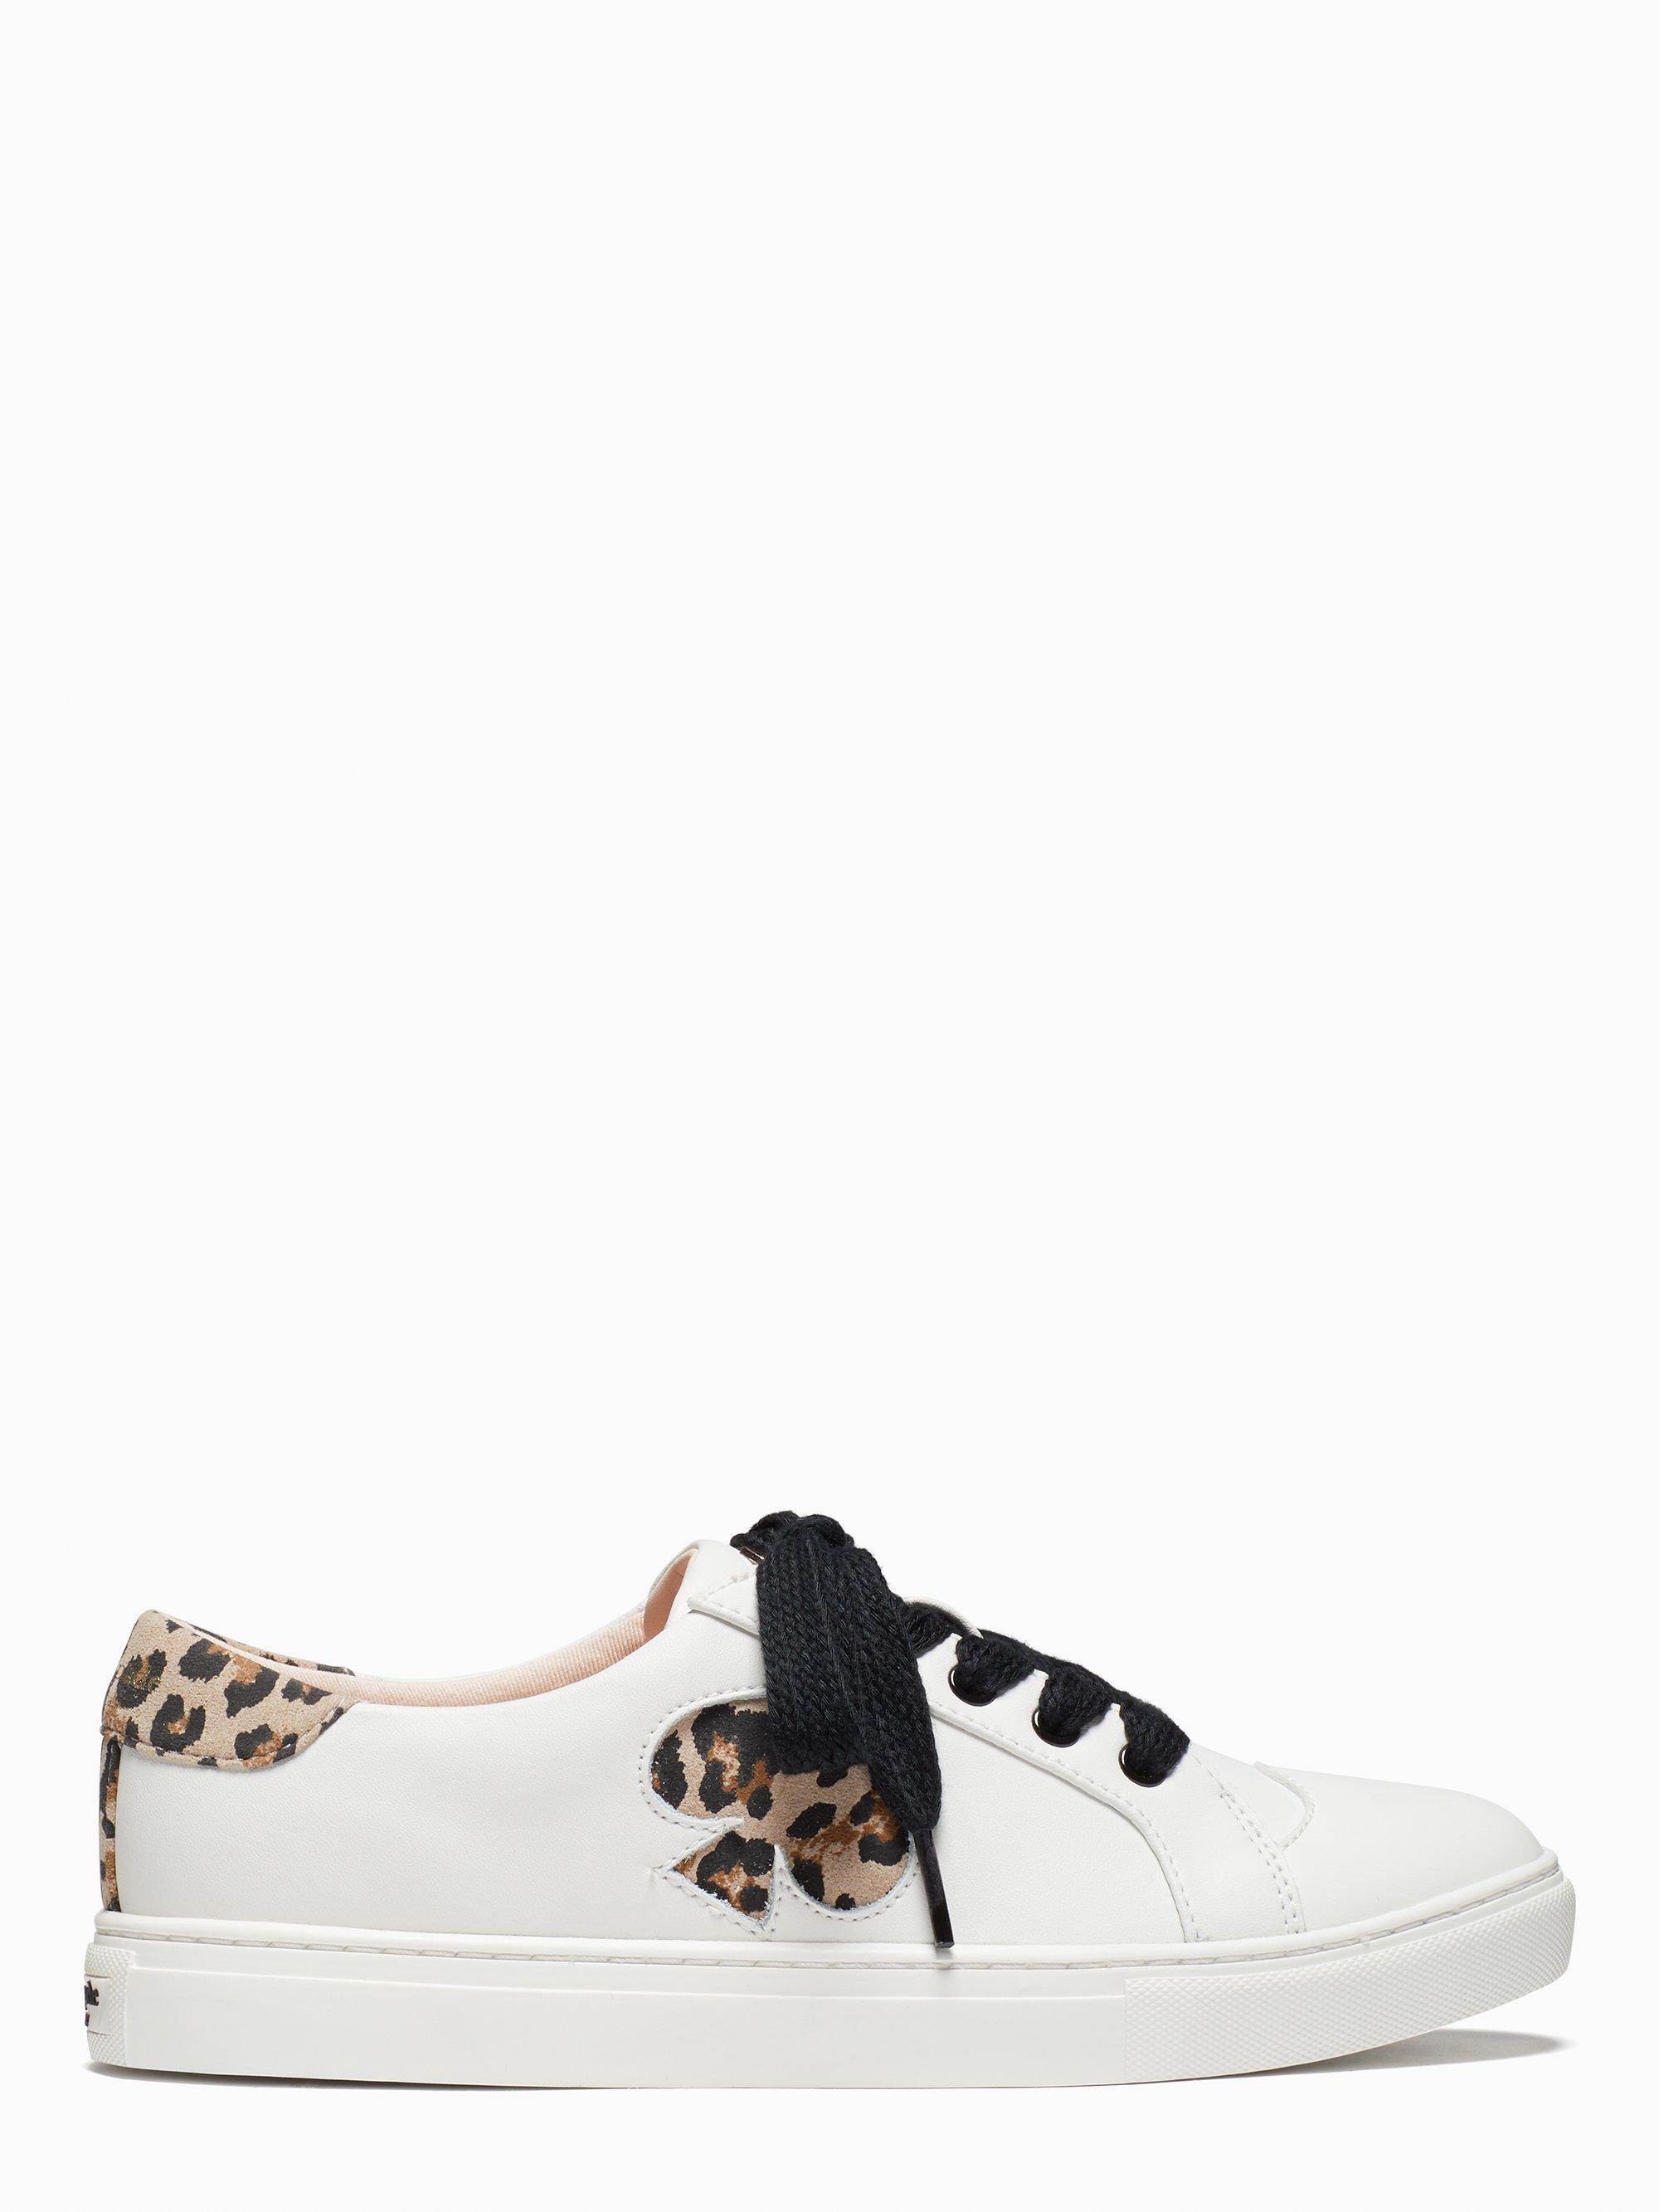 Kate Spade Leather Fez Sneakers, White/leopard Multi - 11 - Lyst